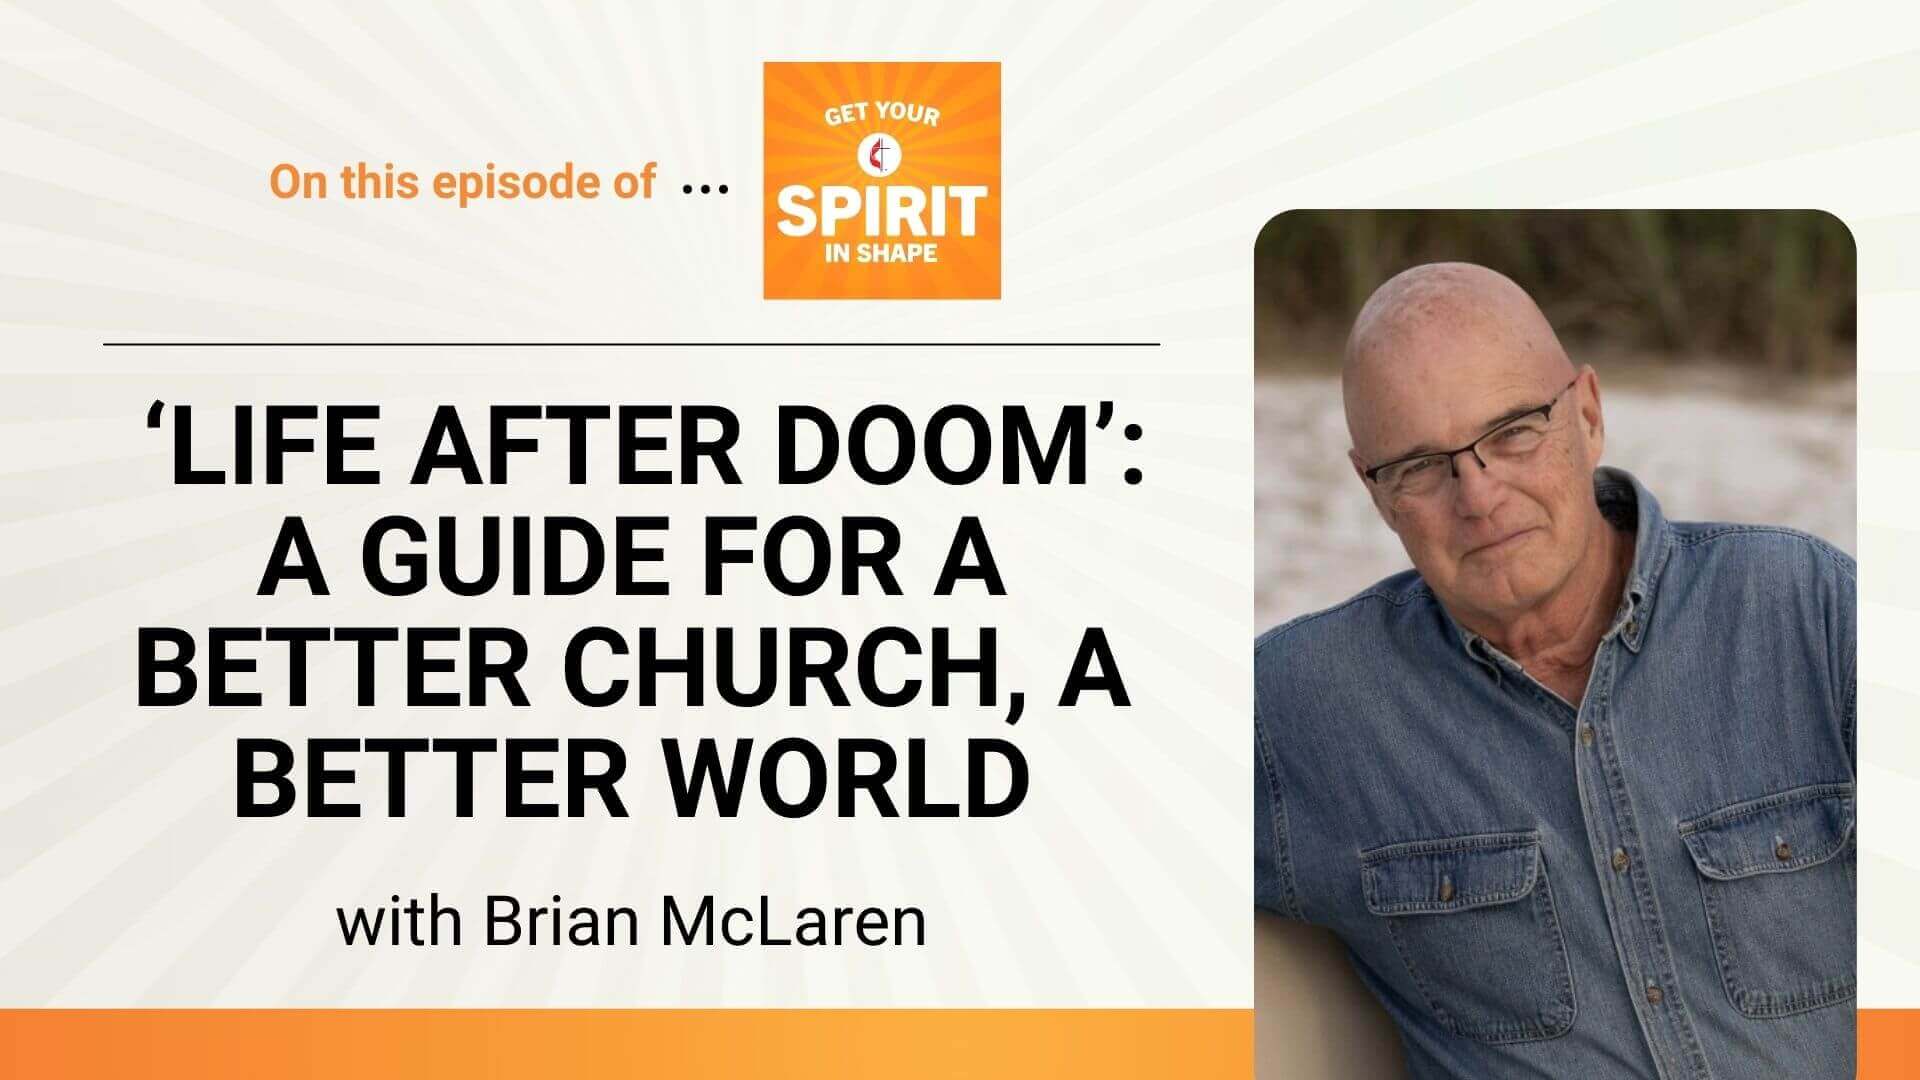 Brian McLaren discusses his book, "Life after Doom," and offers encouragement for how the church and the world can turn crisis into an opportunity for change.